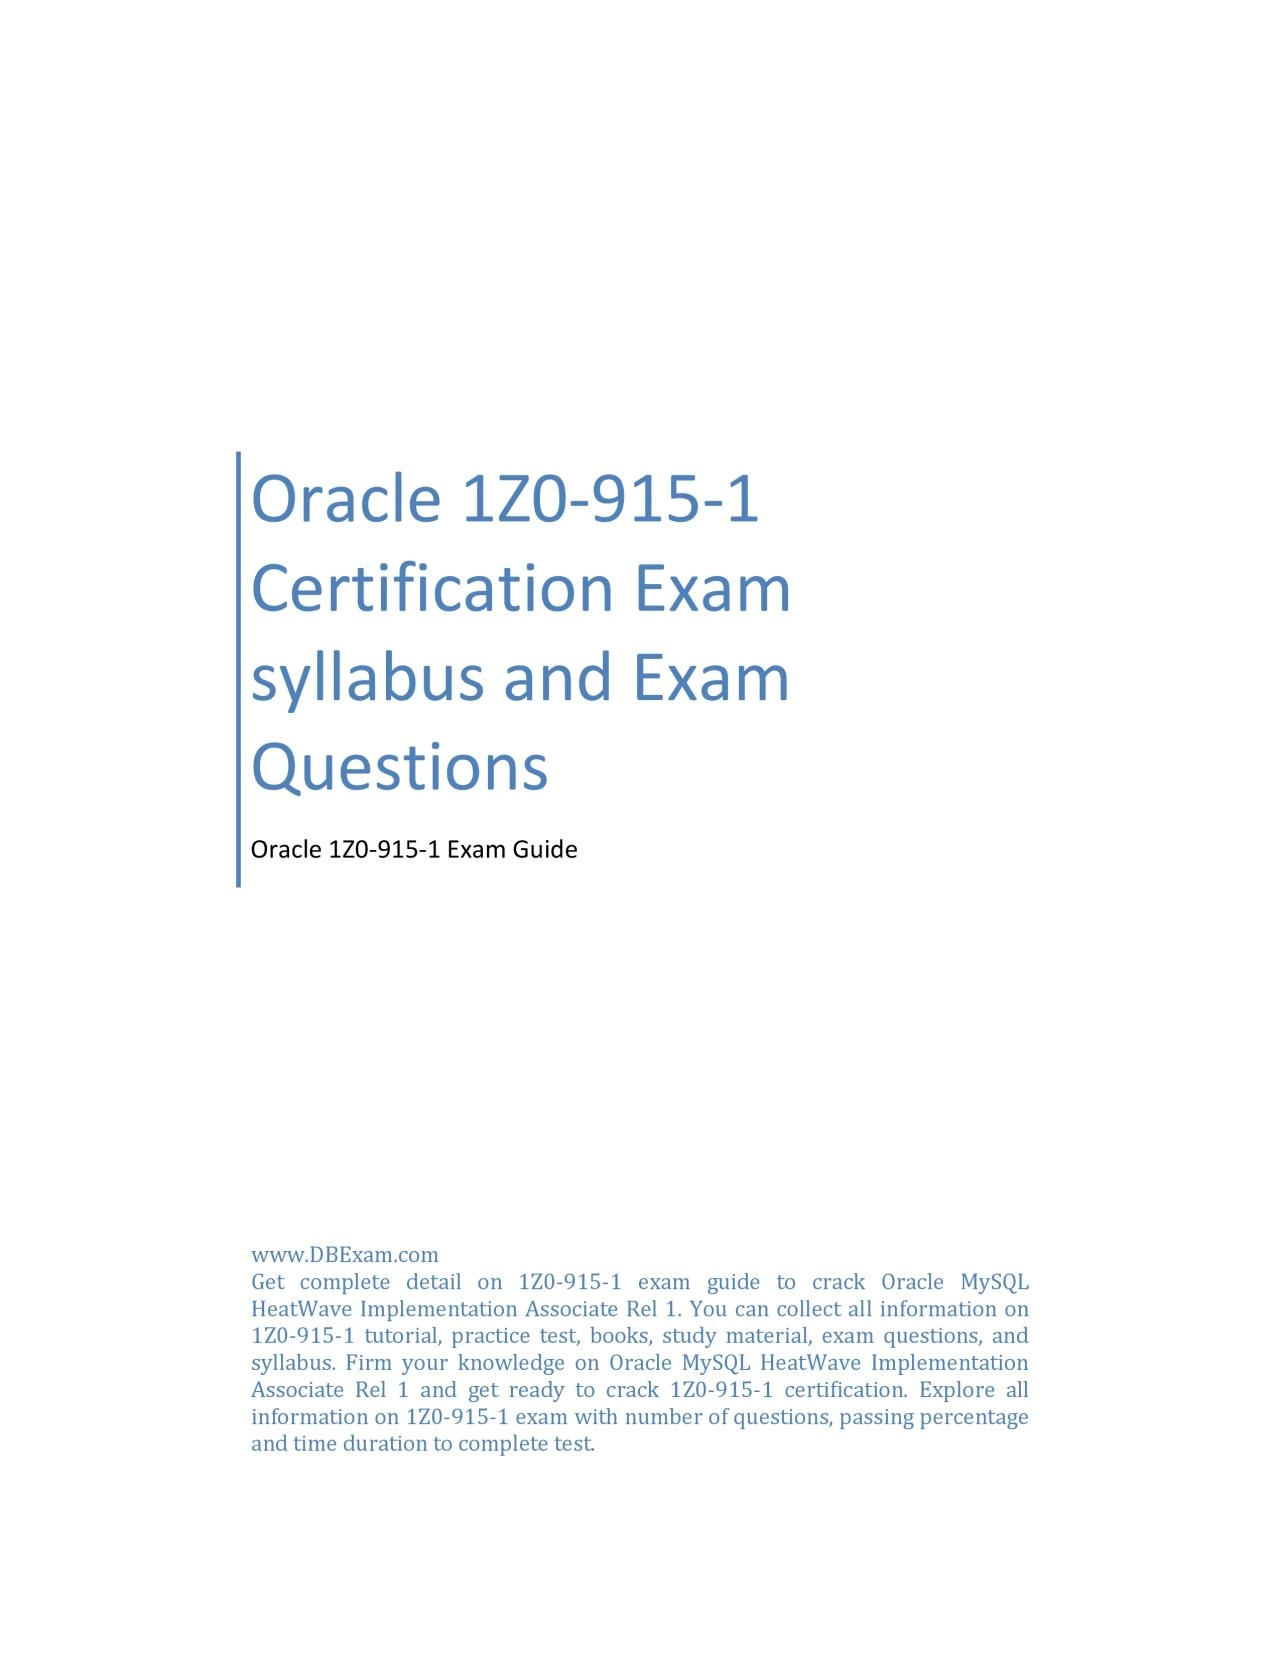 Oracle 1Z0-915-1 Certification Exam syllabus and Exam Questions